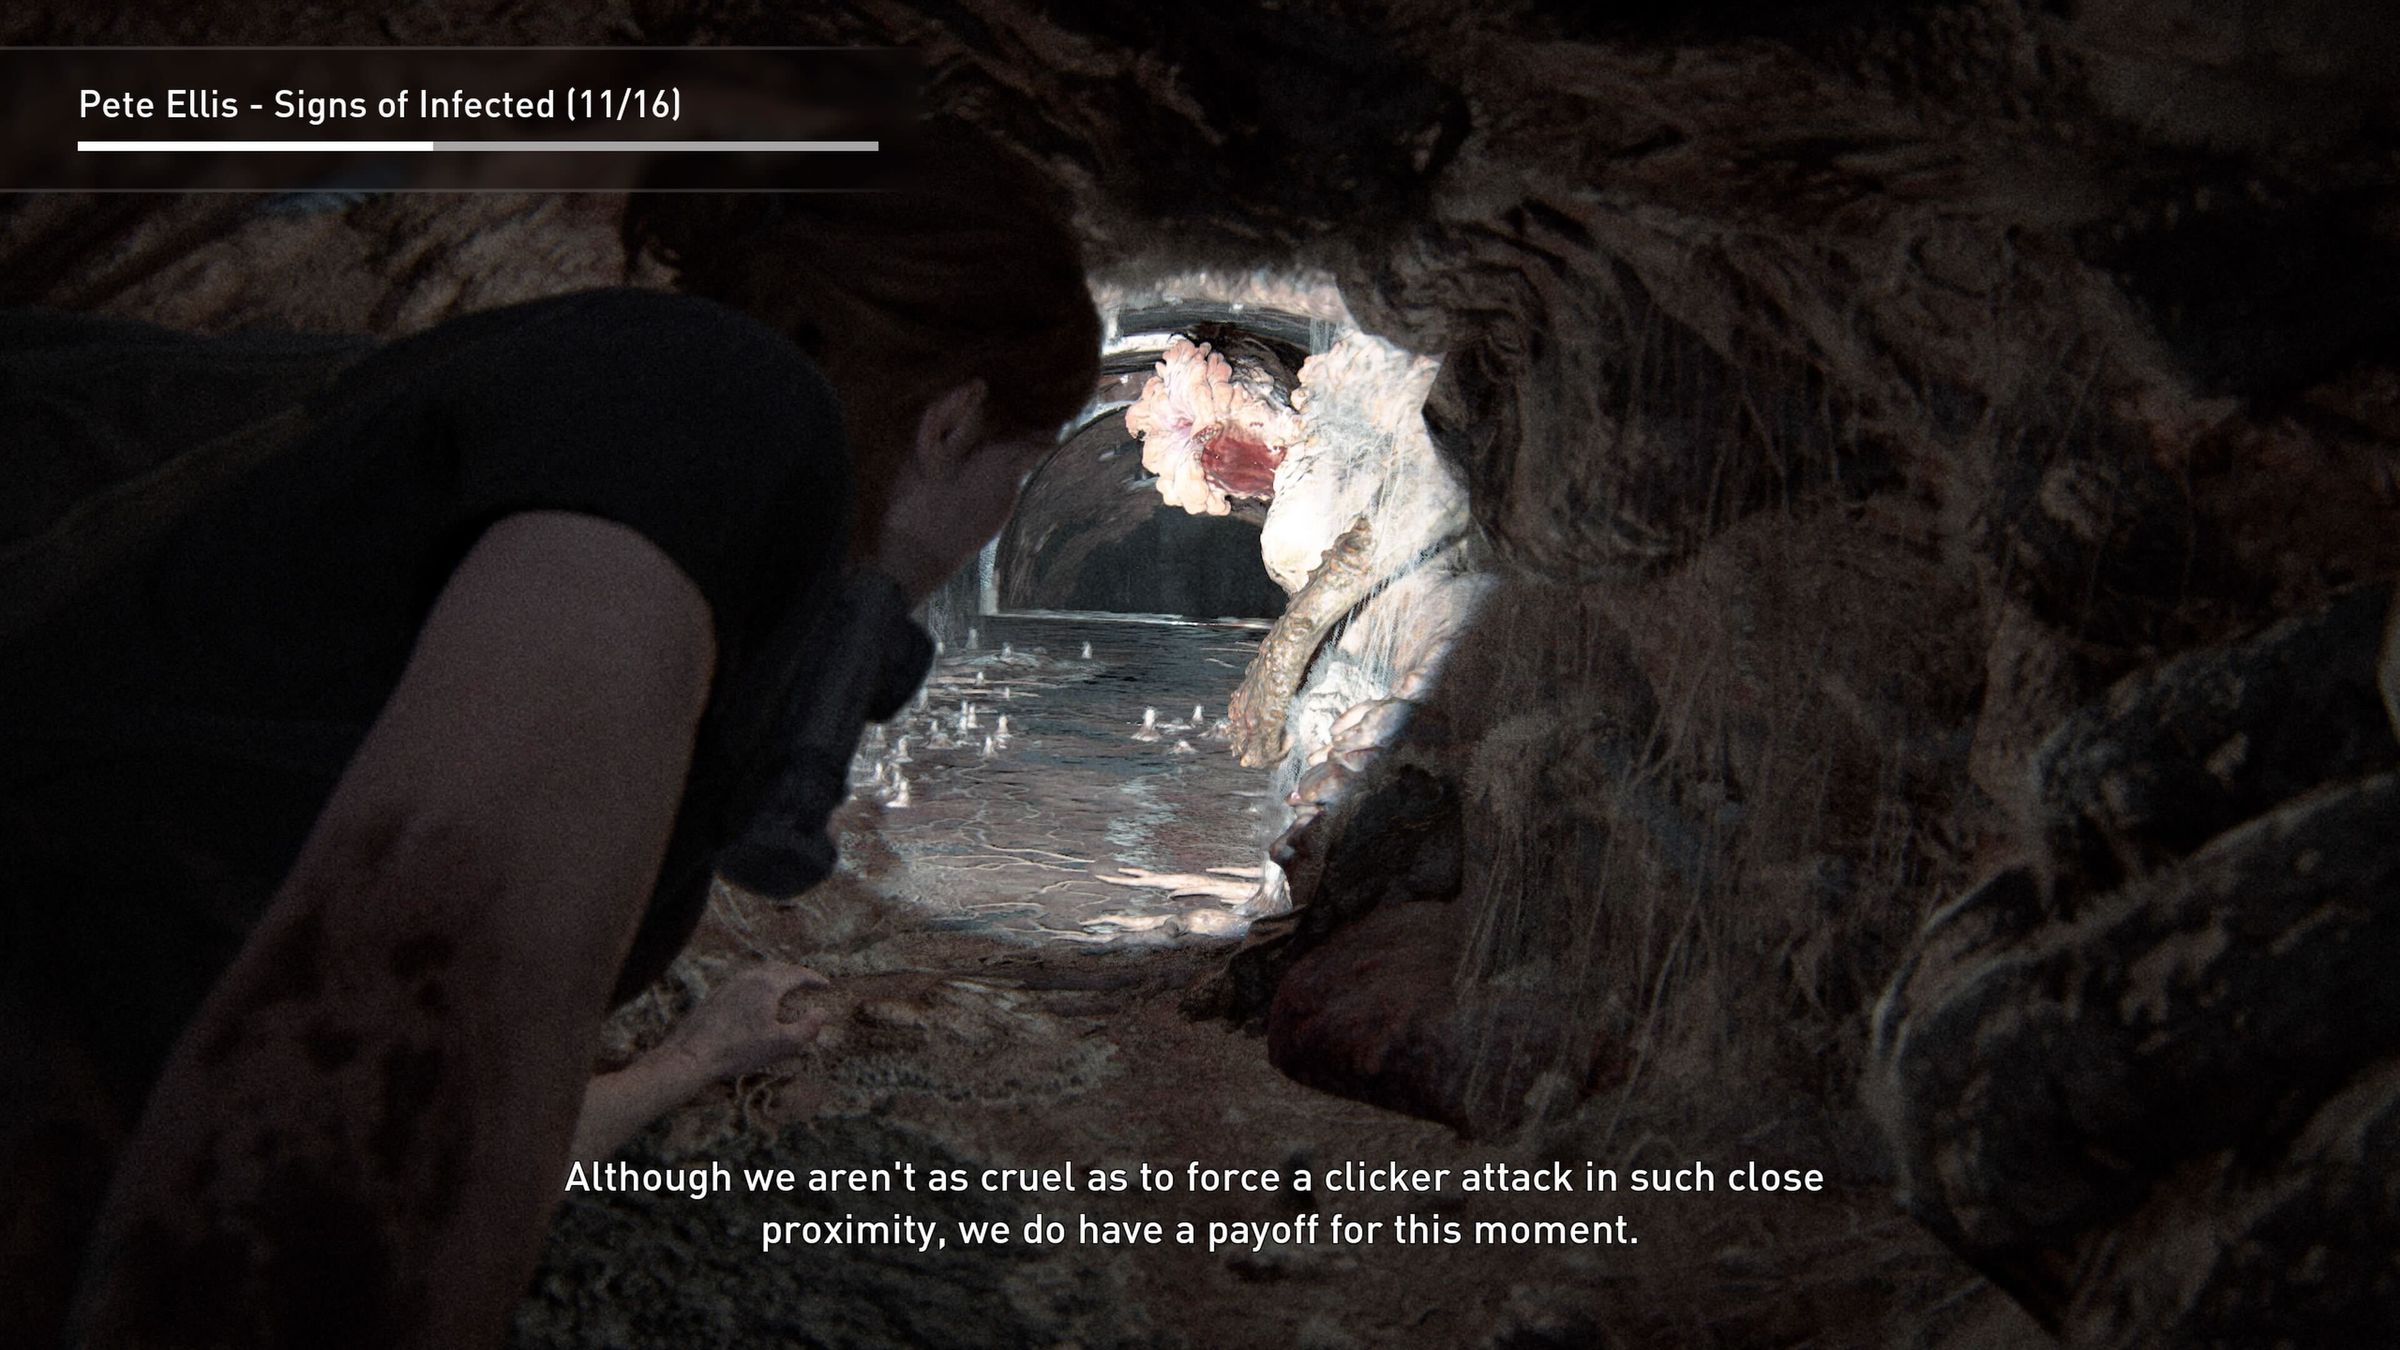 A screenshot featuring Ellie crawling through a sewer in a deleted scene from The Last of Us Part II.